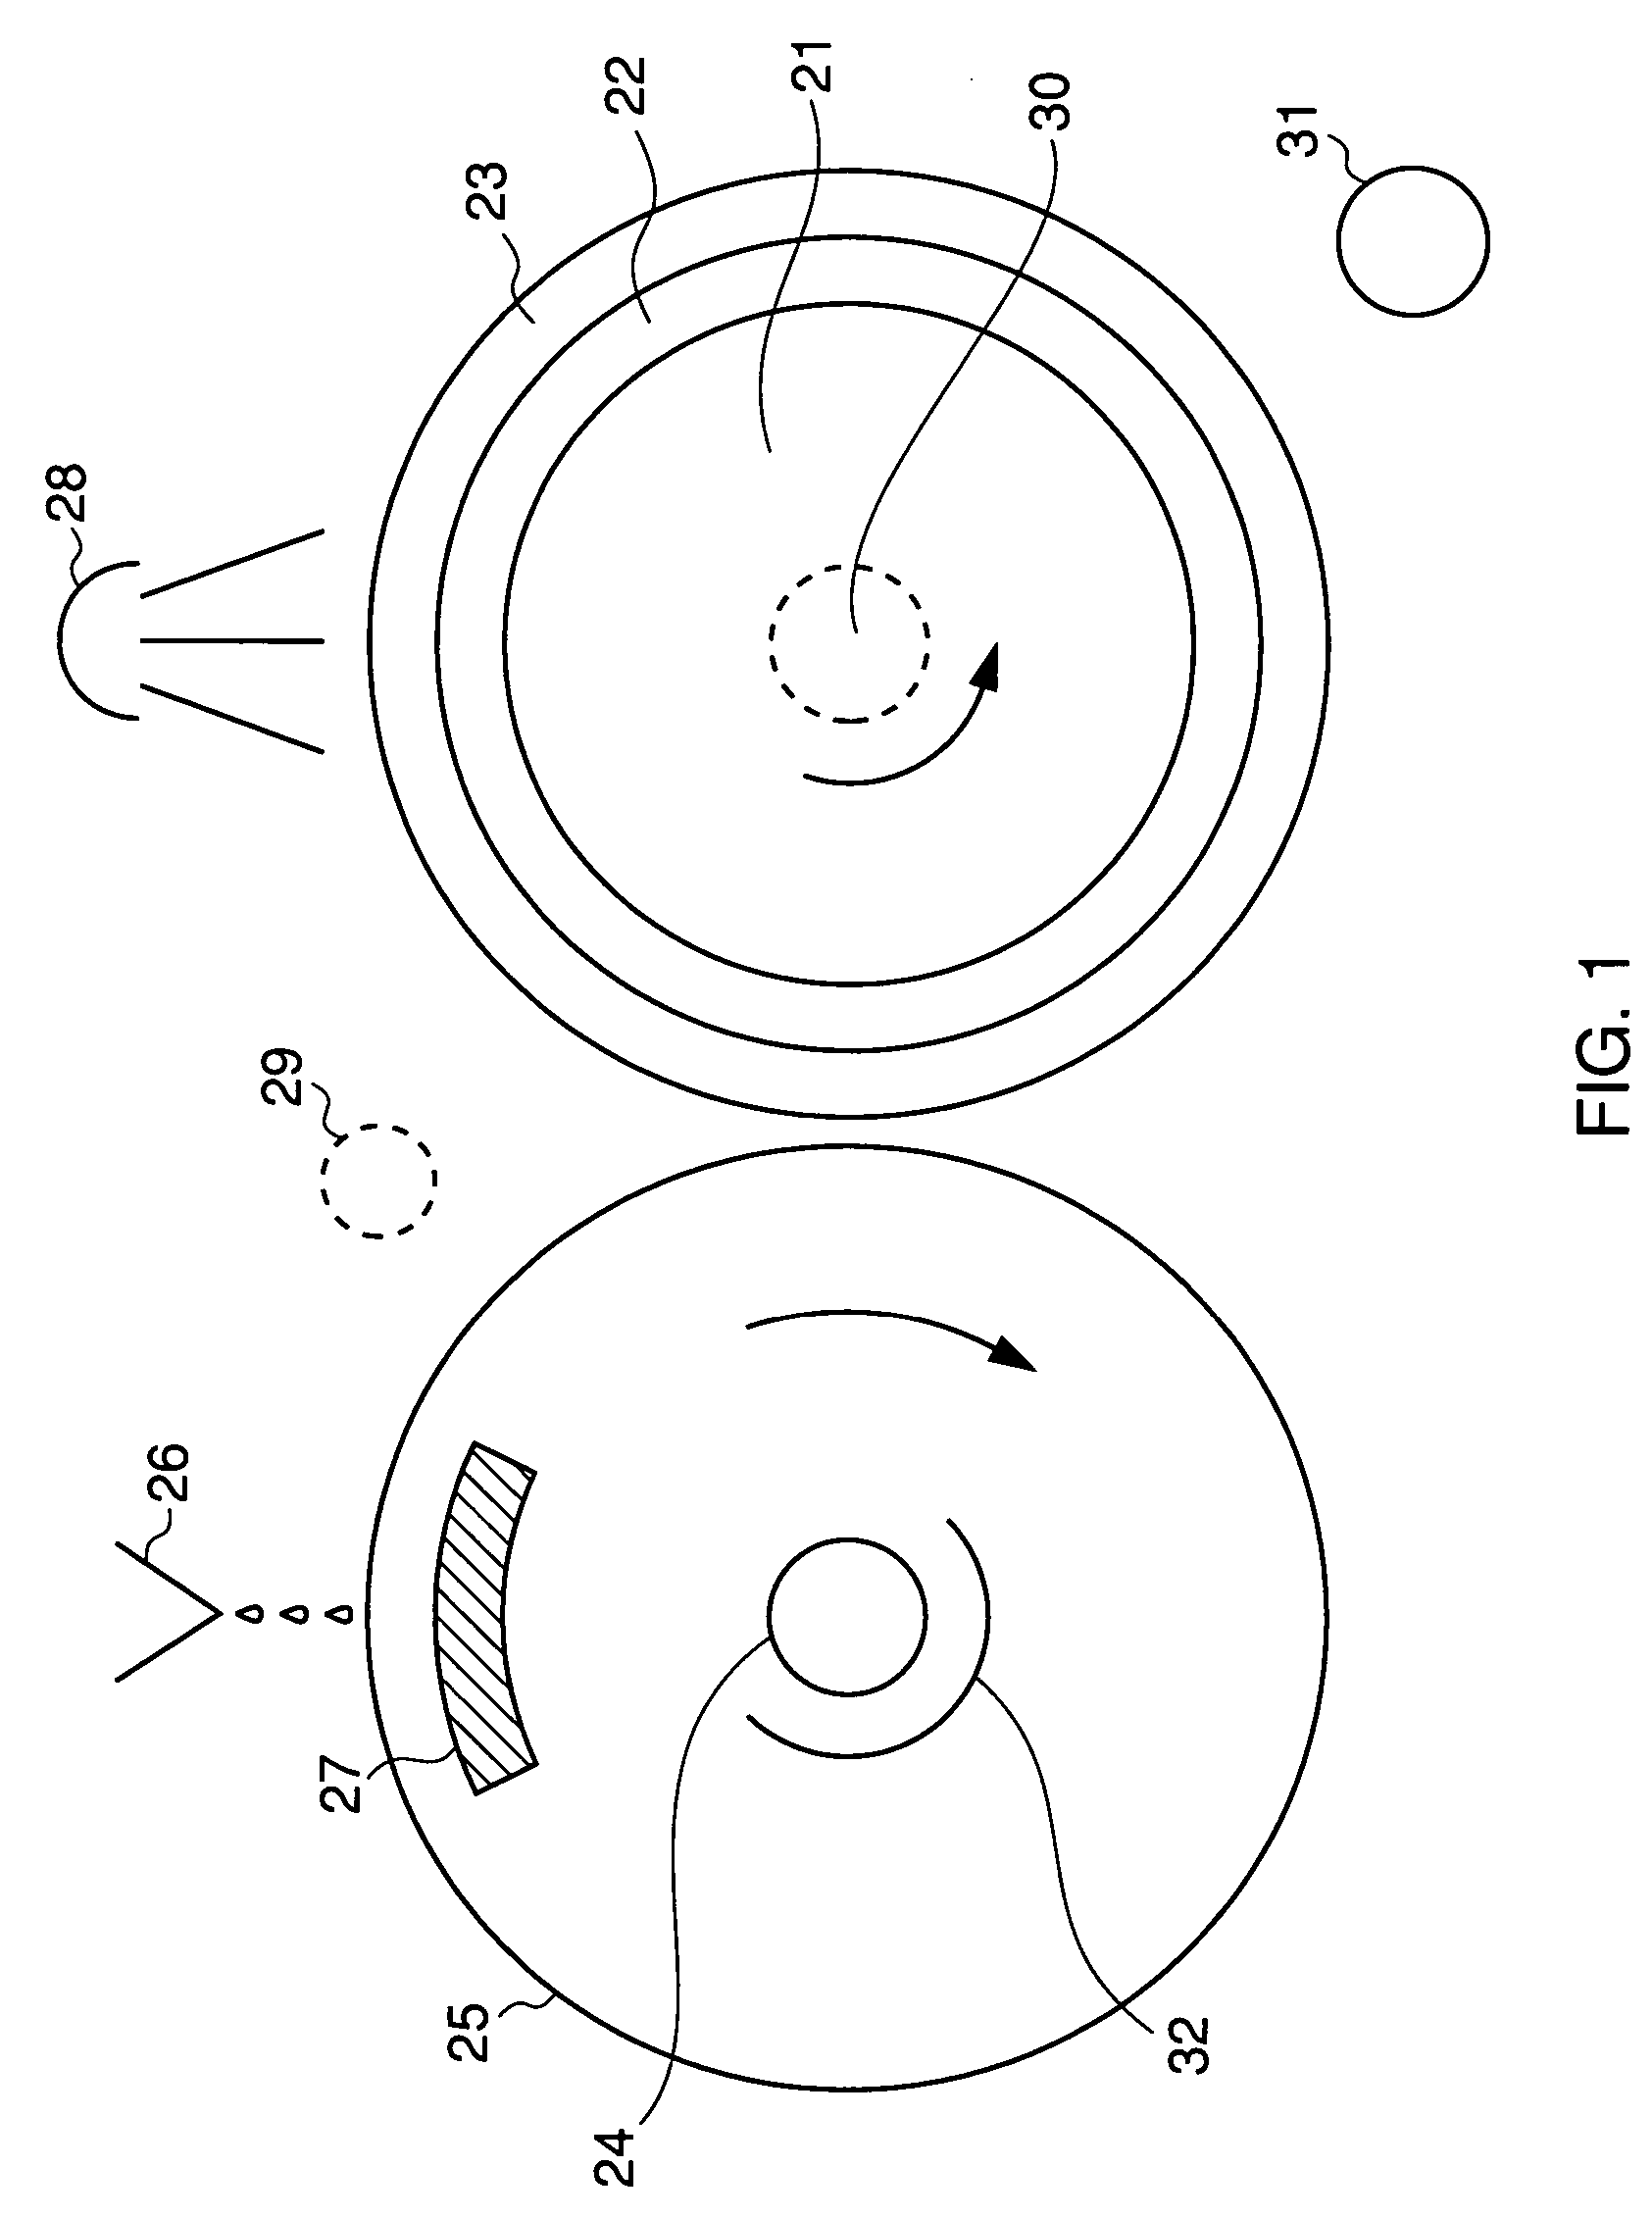 Method for producing a flexographic printing plate formed by inkjetted fluid